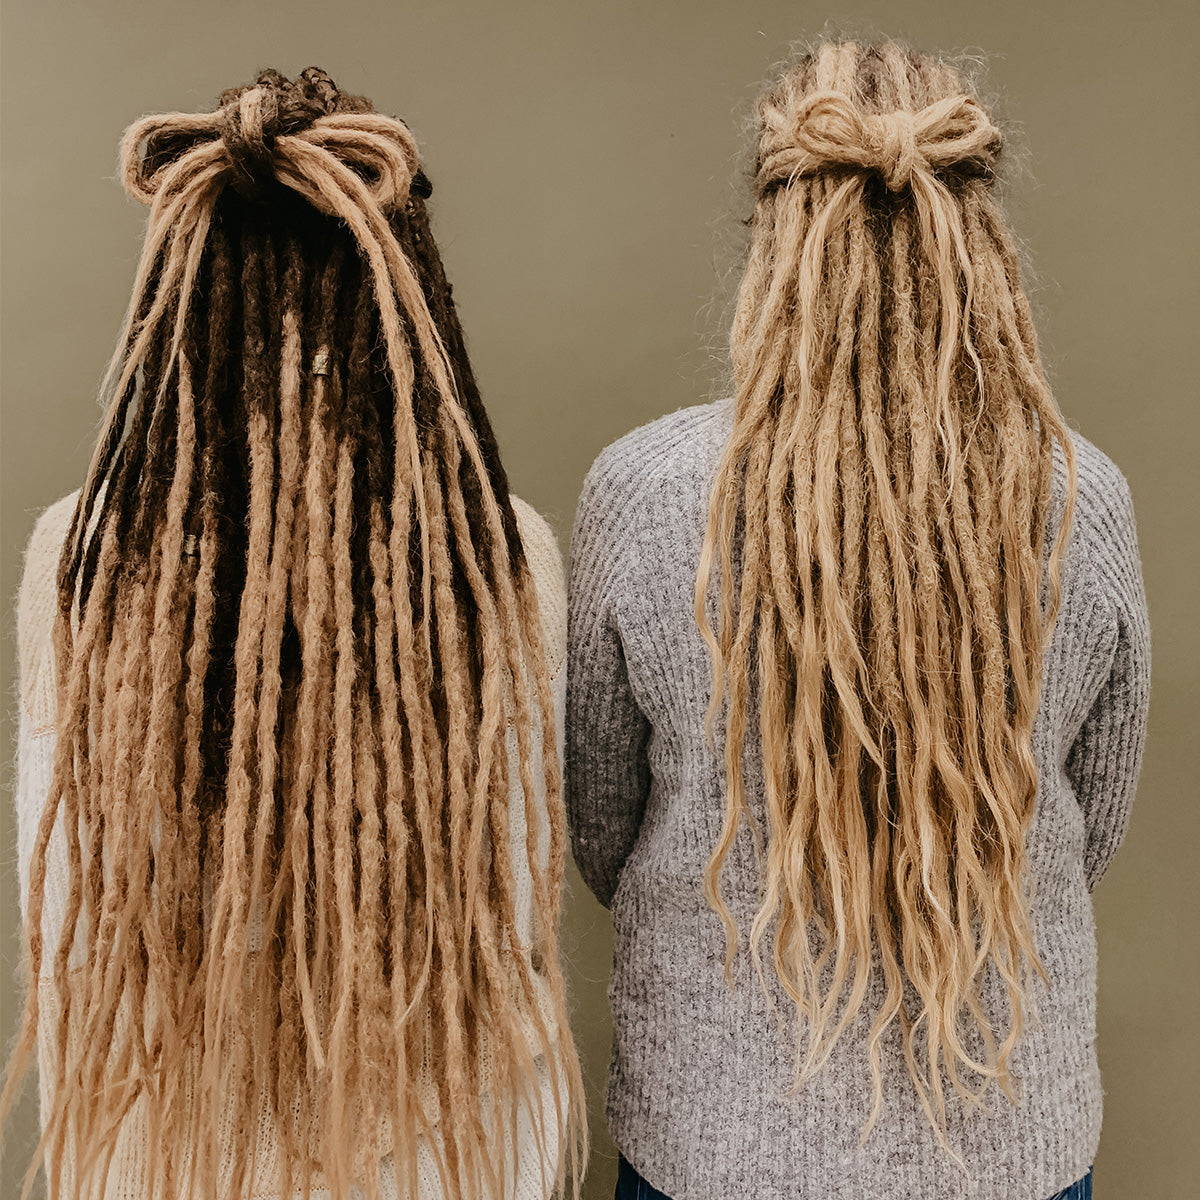 What is the difference between Real Dreads and Synthetic Dreads?